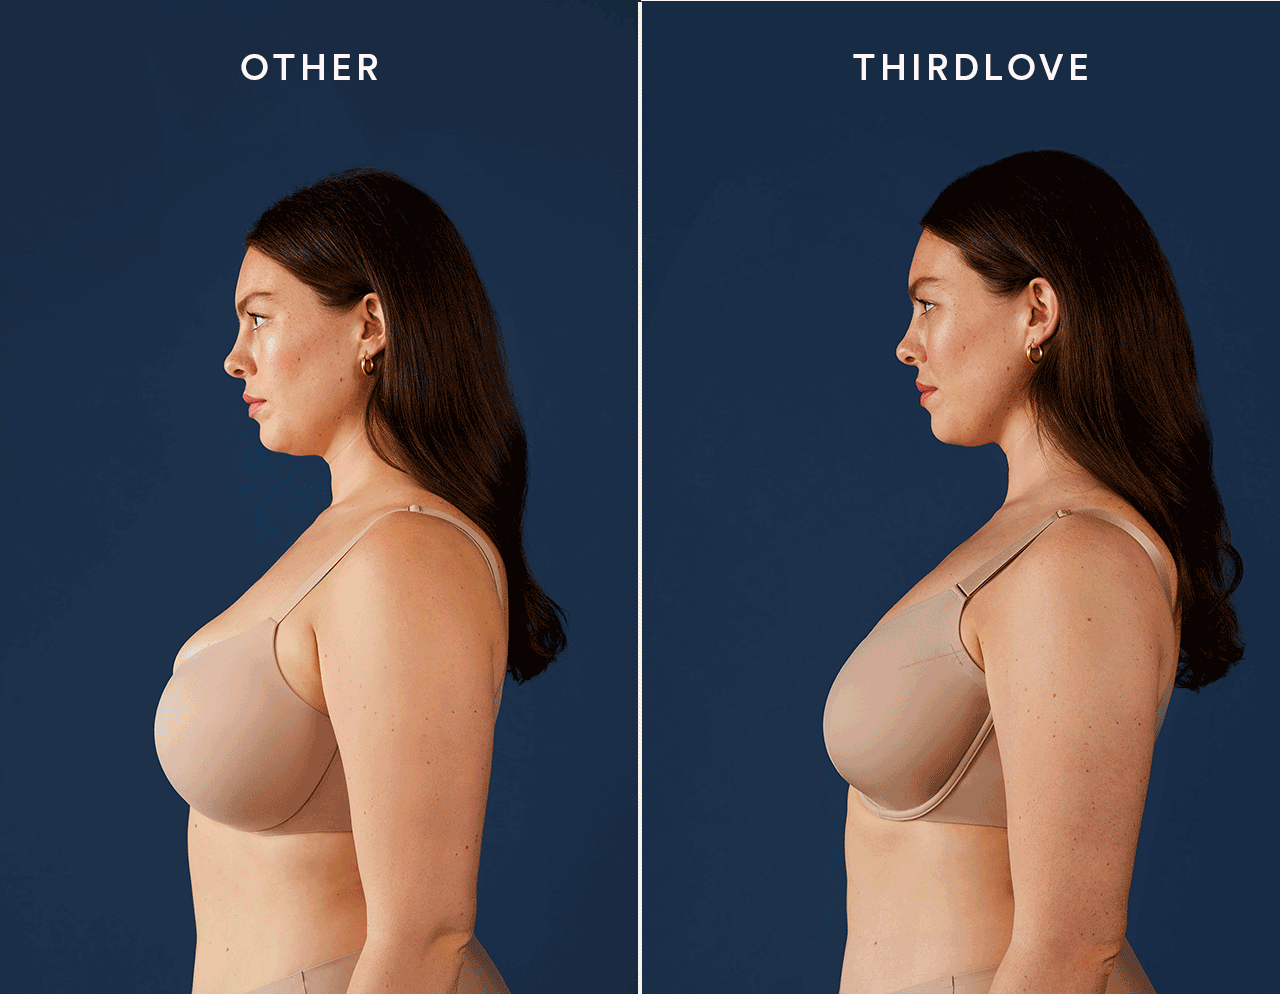 ThirdLove, the direct-to-consumer lingerie startup, gets a $55M